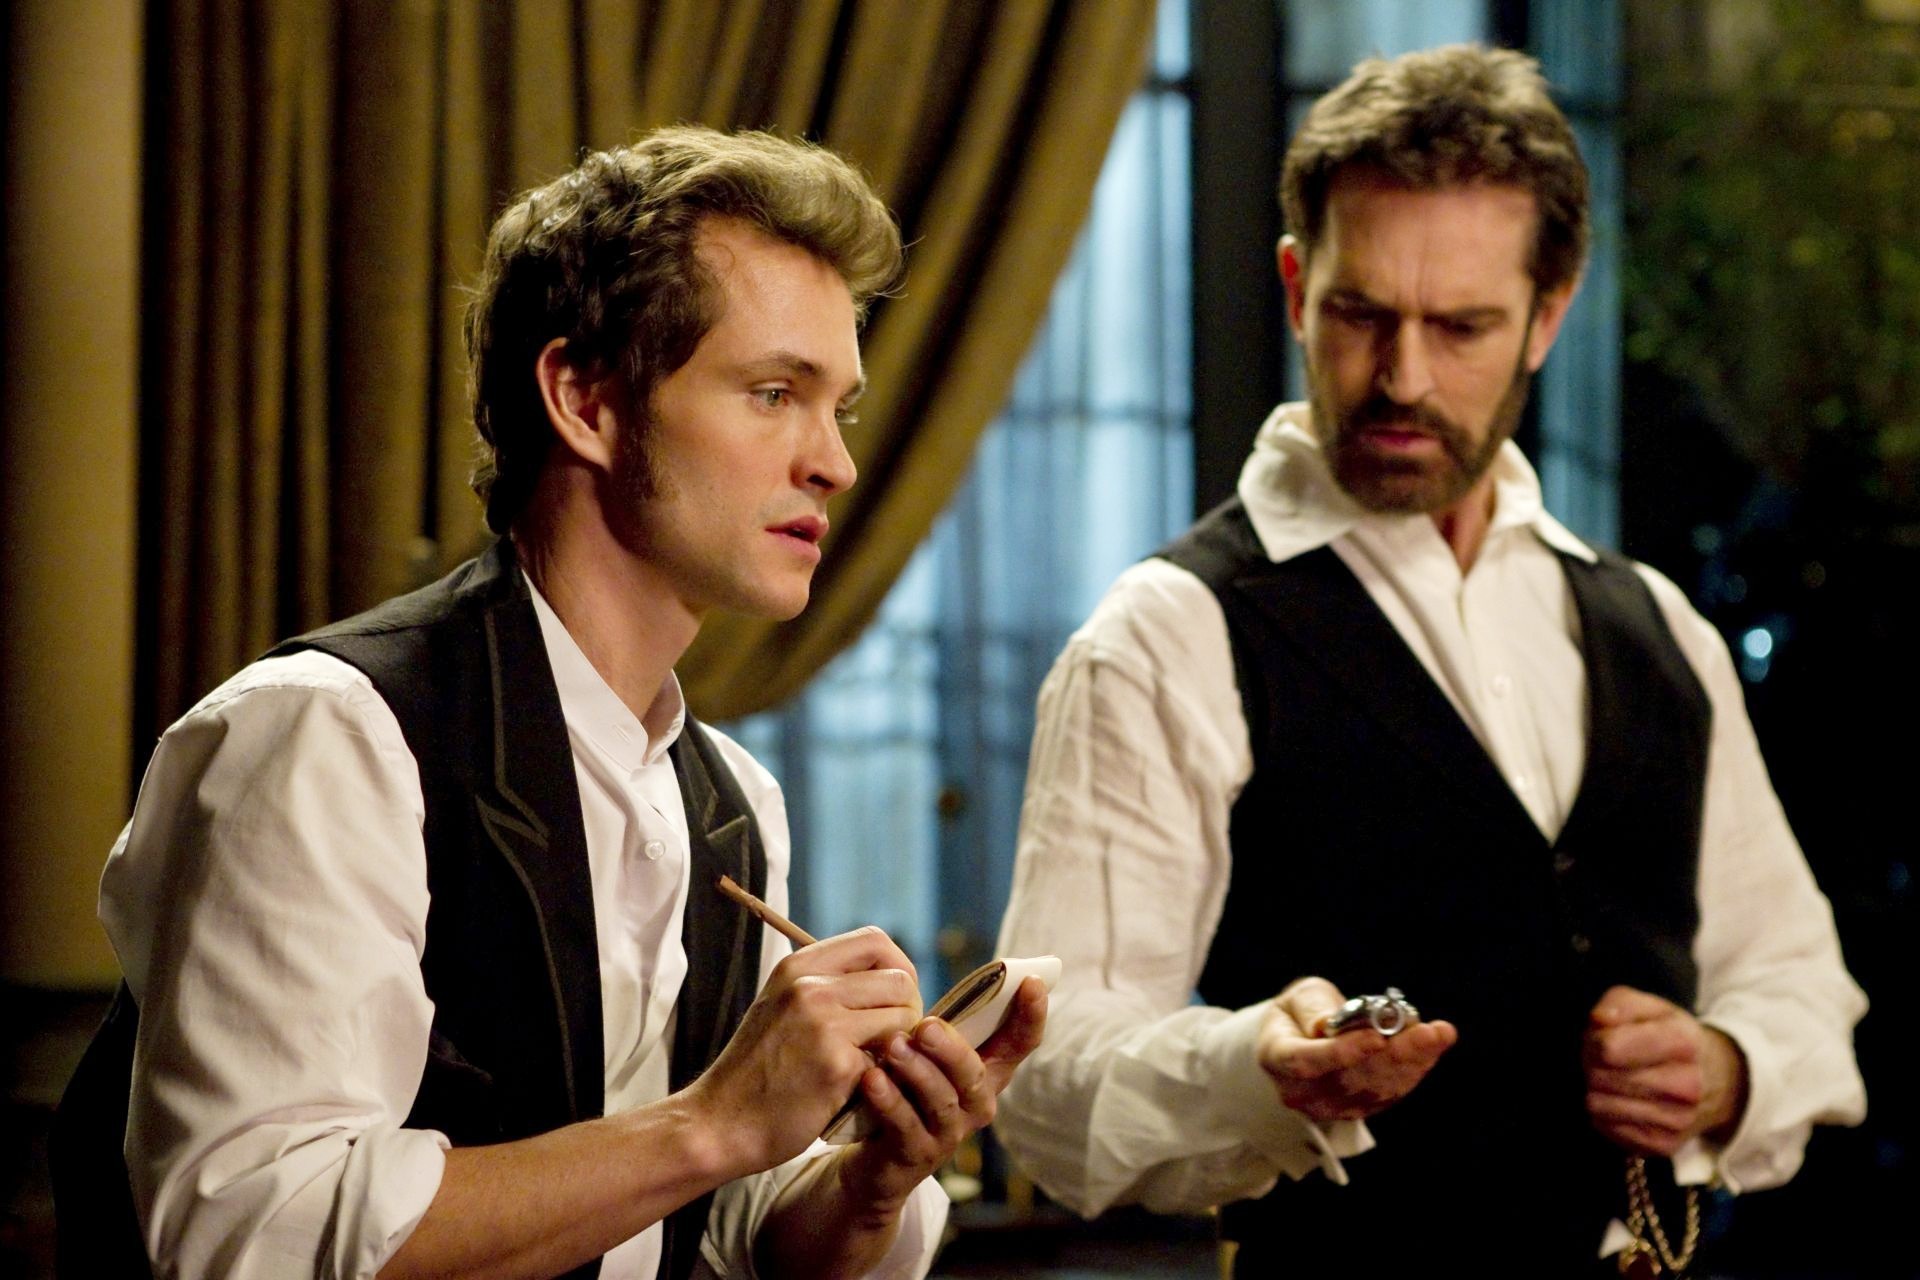 Hugh Dancy stars as Mortimer Granville and Rupert Everett in Sony Pictures Classics' Hysteria (2012)